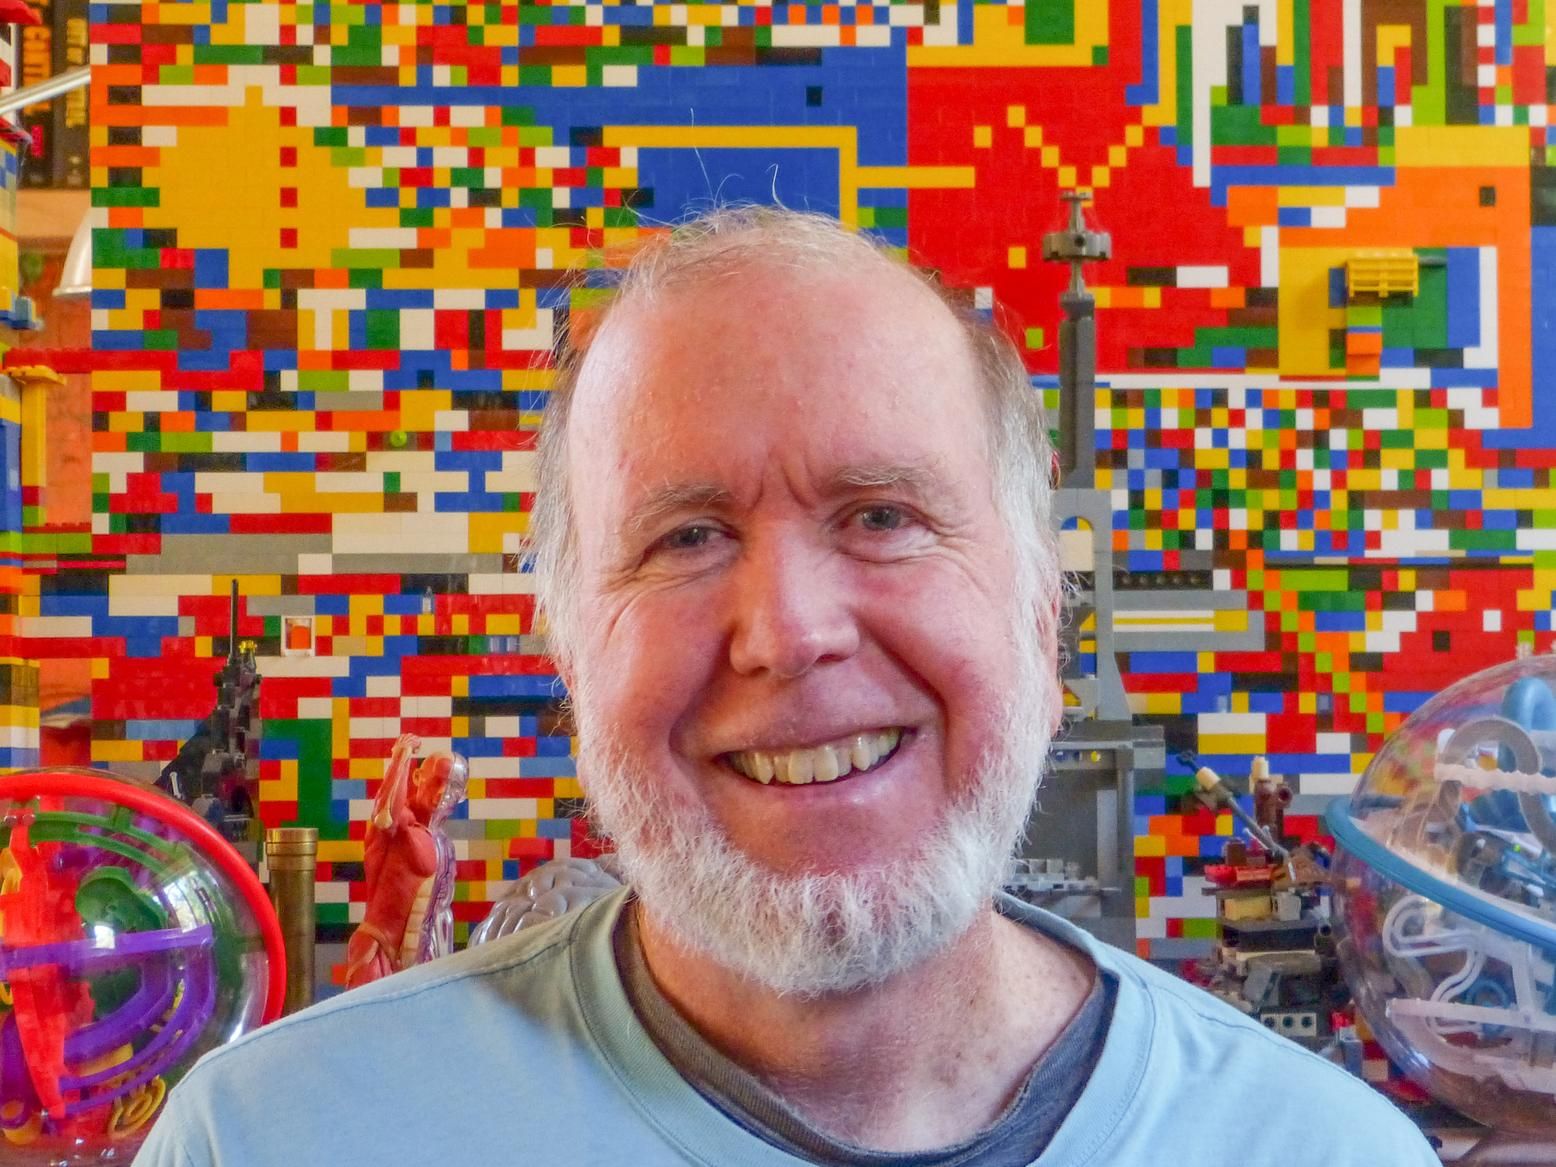 em>Wired</em> Founder Kevin Kelly On the Technologies That Will Dominate  Our Future, Innovation